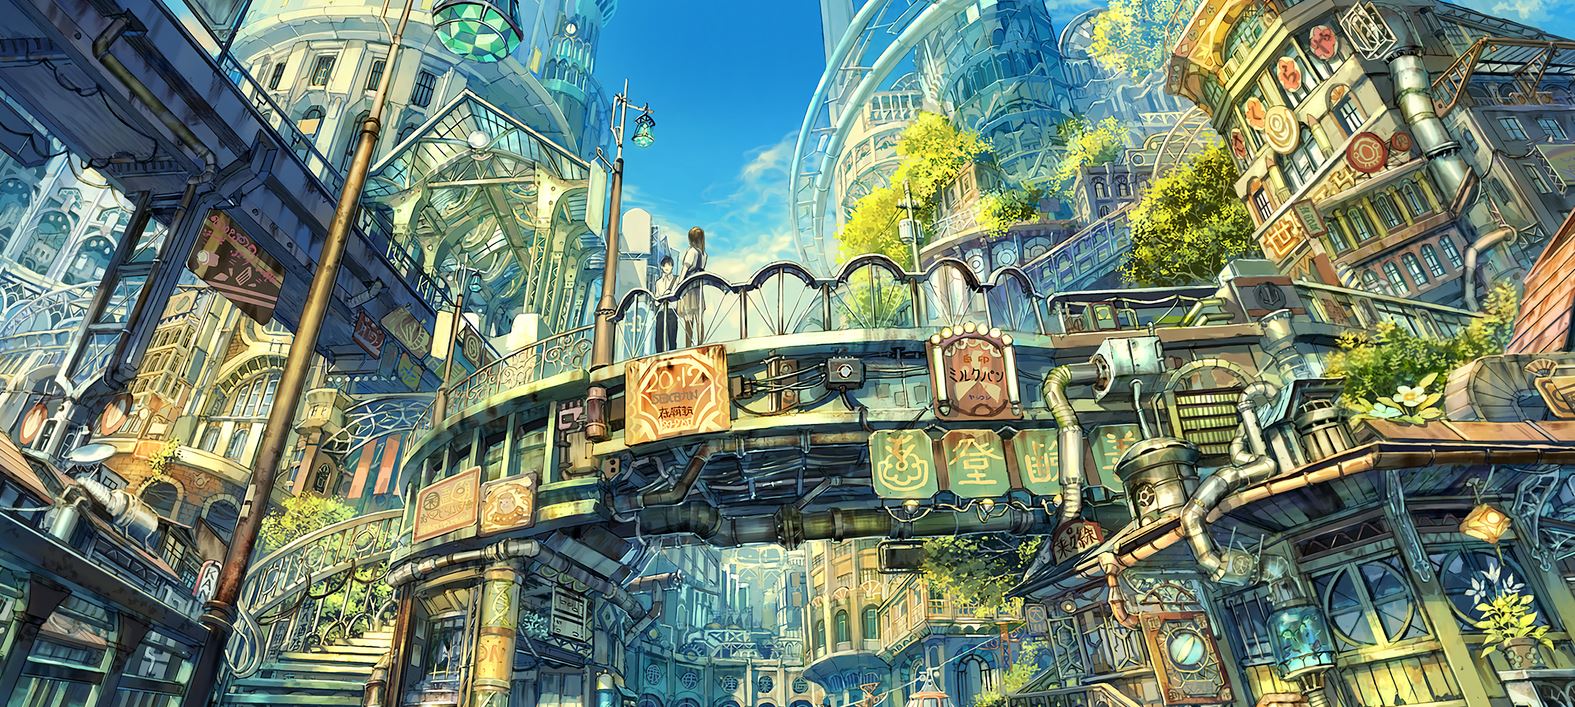 What Could an Optimistic Solarpunk Future Look Like? - The Shift